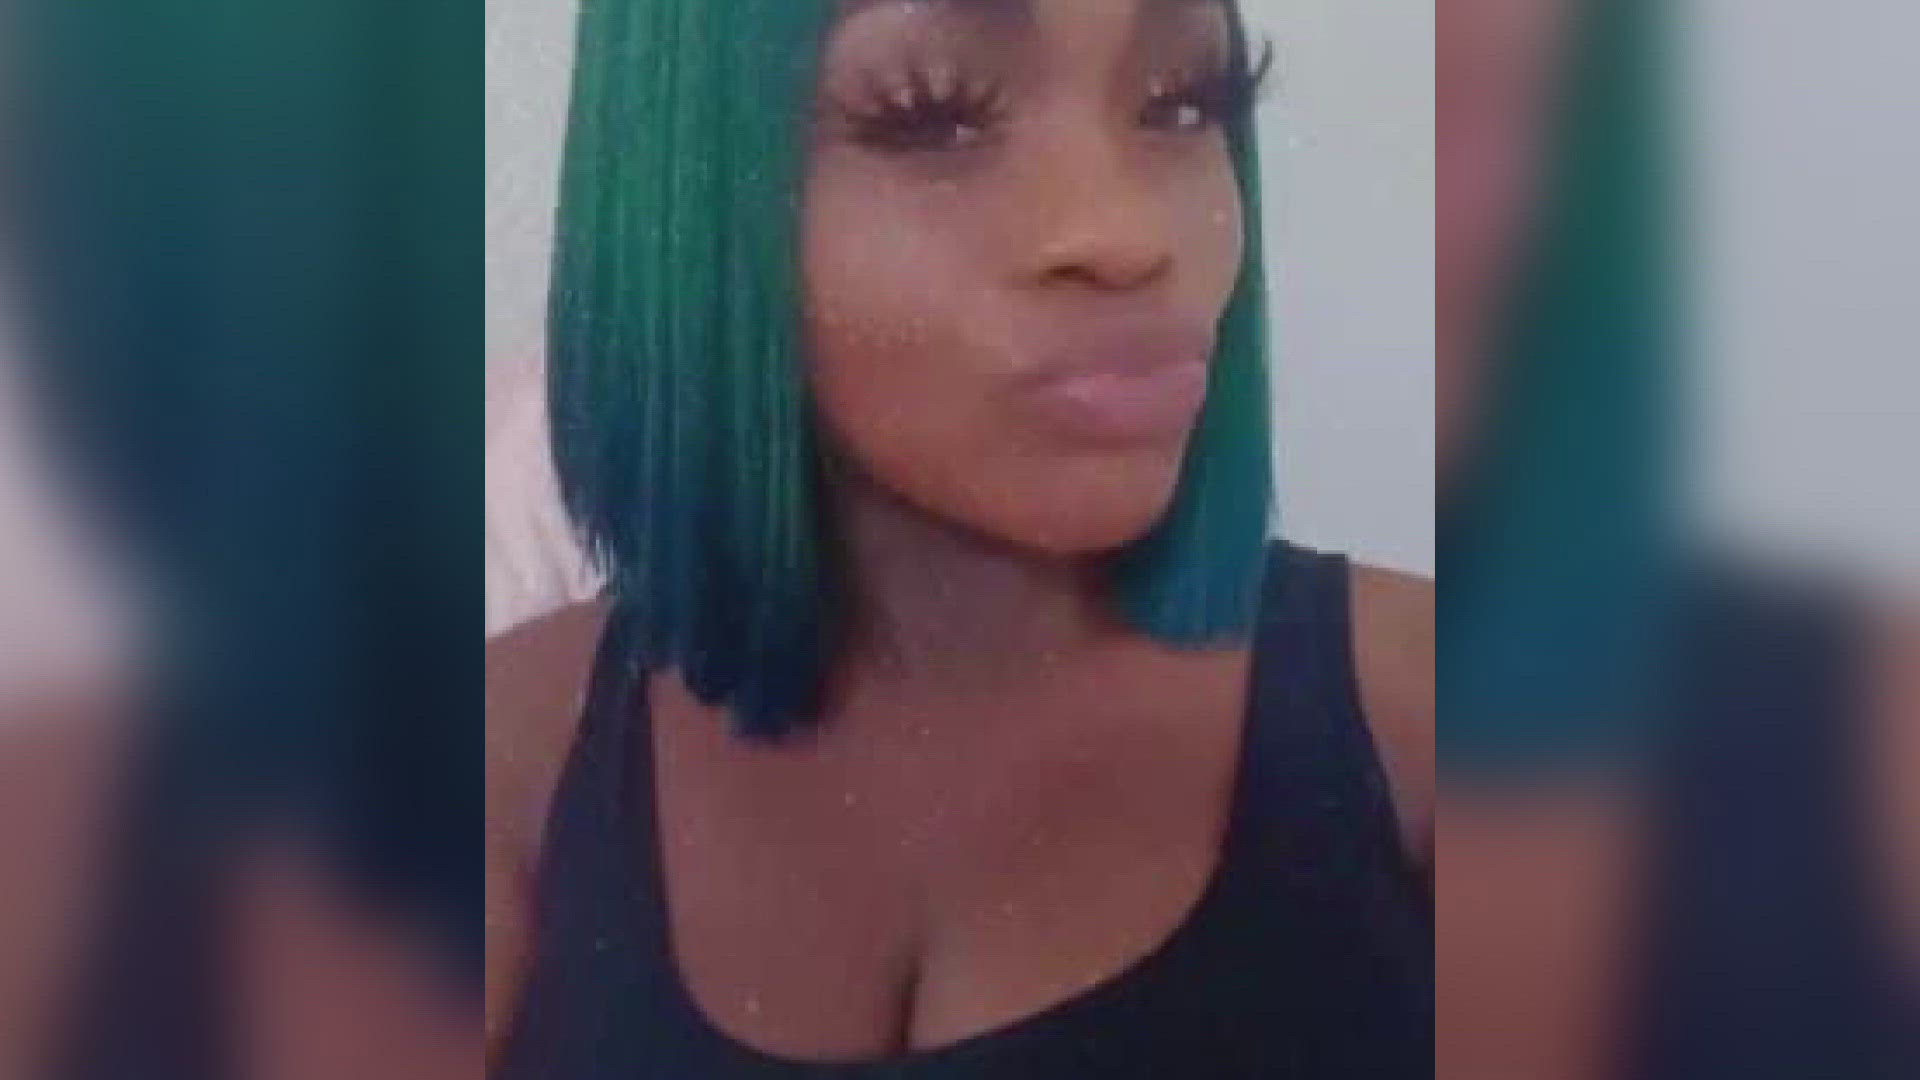 Tangipahoa Sheriff's Office says 31-year-old New Orleans woman was found in a car fatally stabbed multiple times on Saturday.